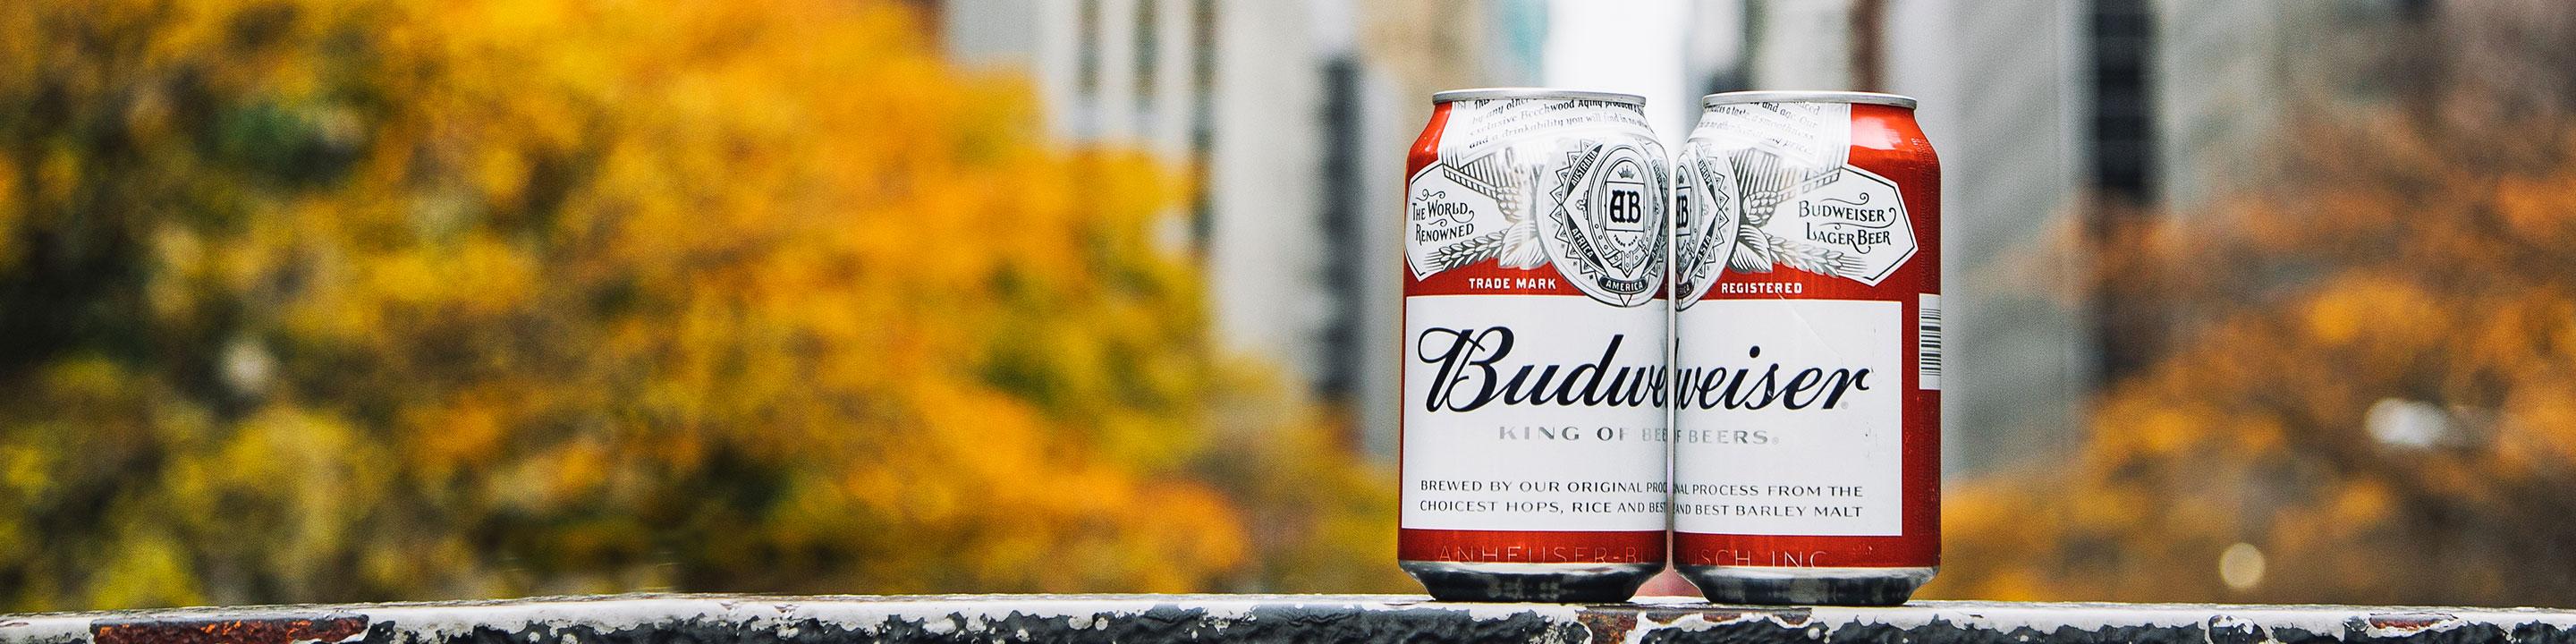 Buy Budweiser online from nearby liquor stores via Minibar Delivery.
